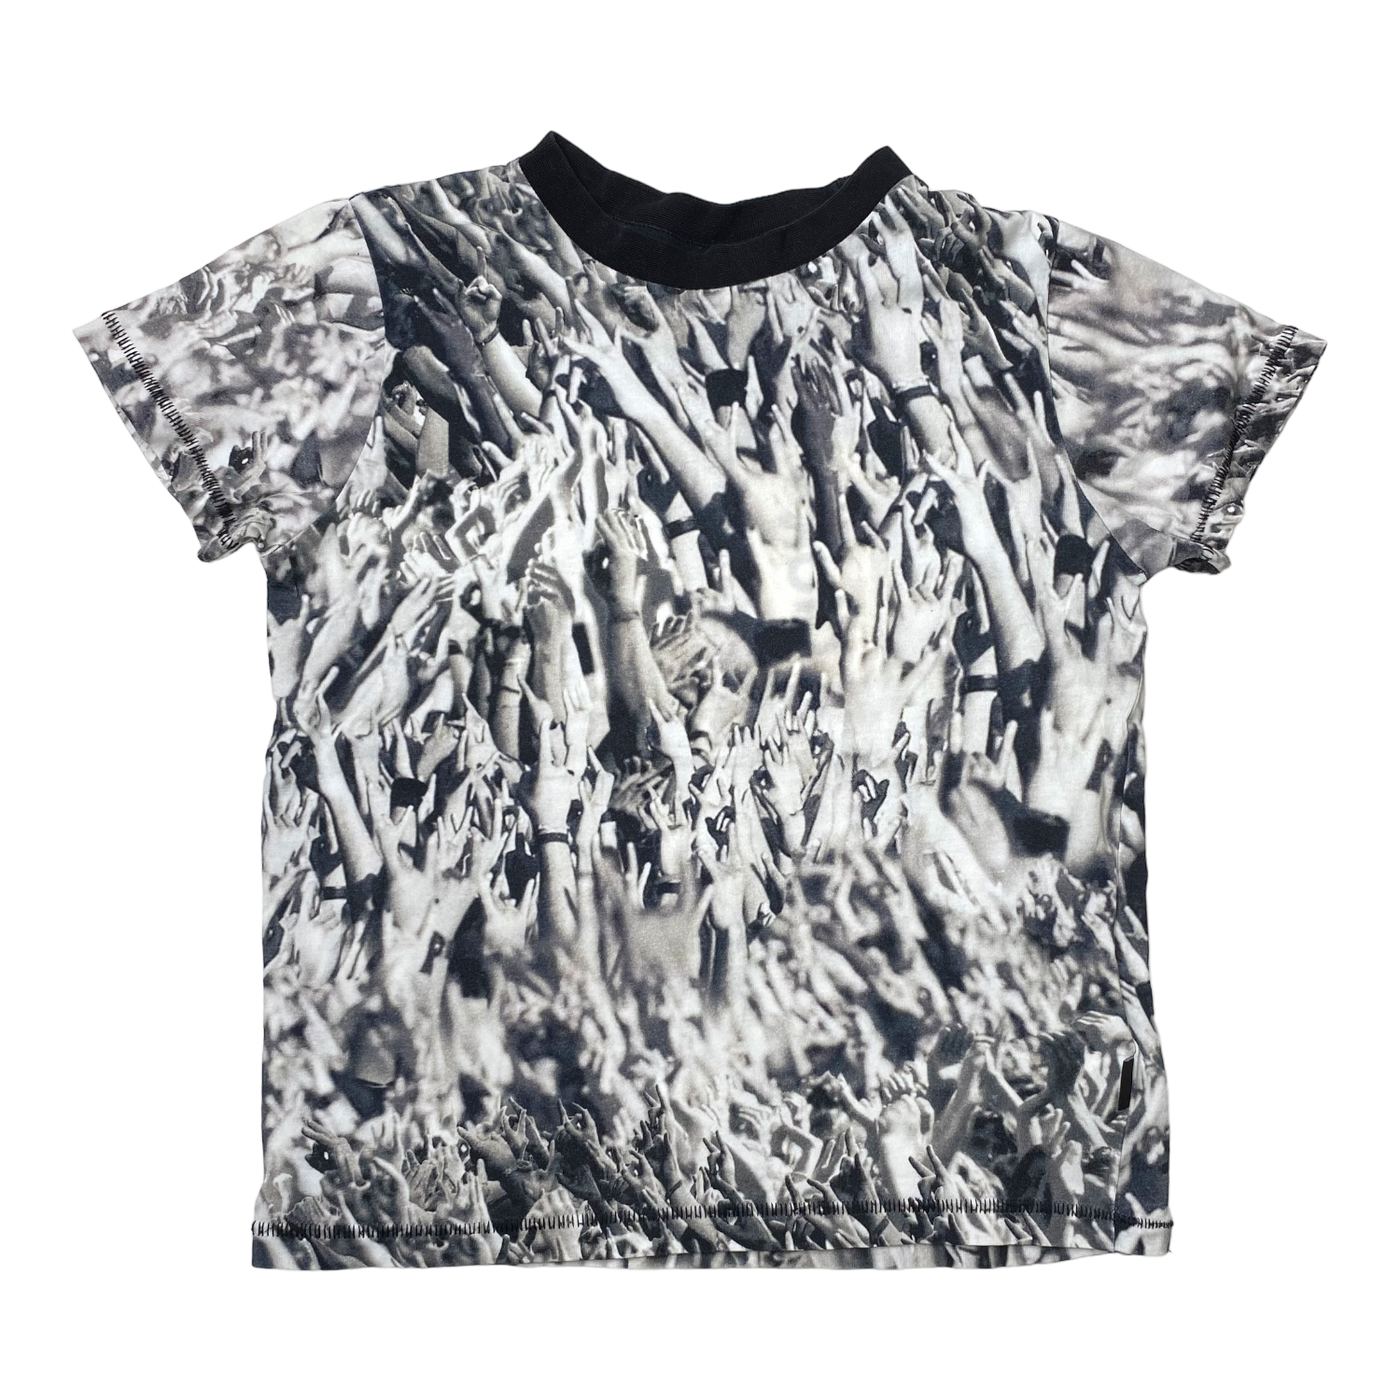 Molo t-shirt, hands in the air | 116cm